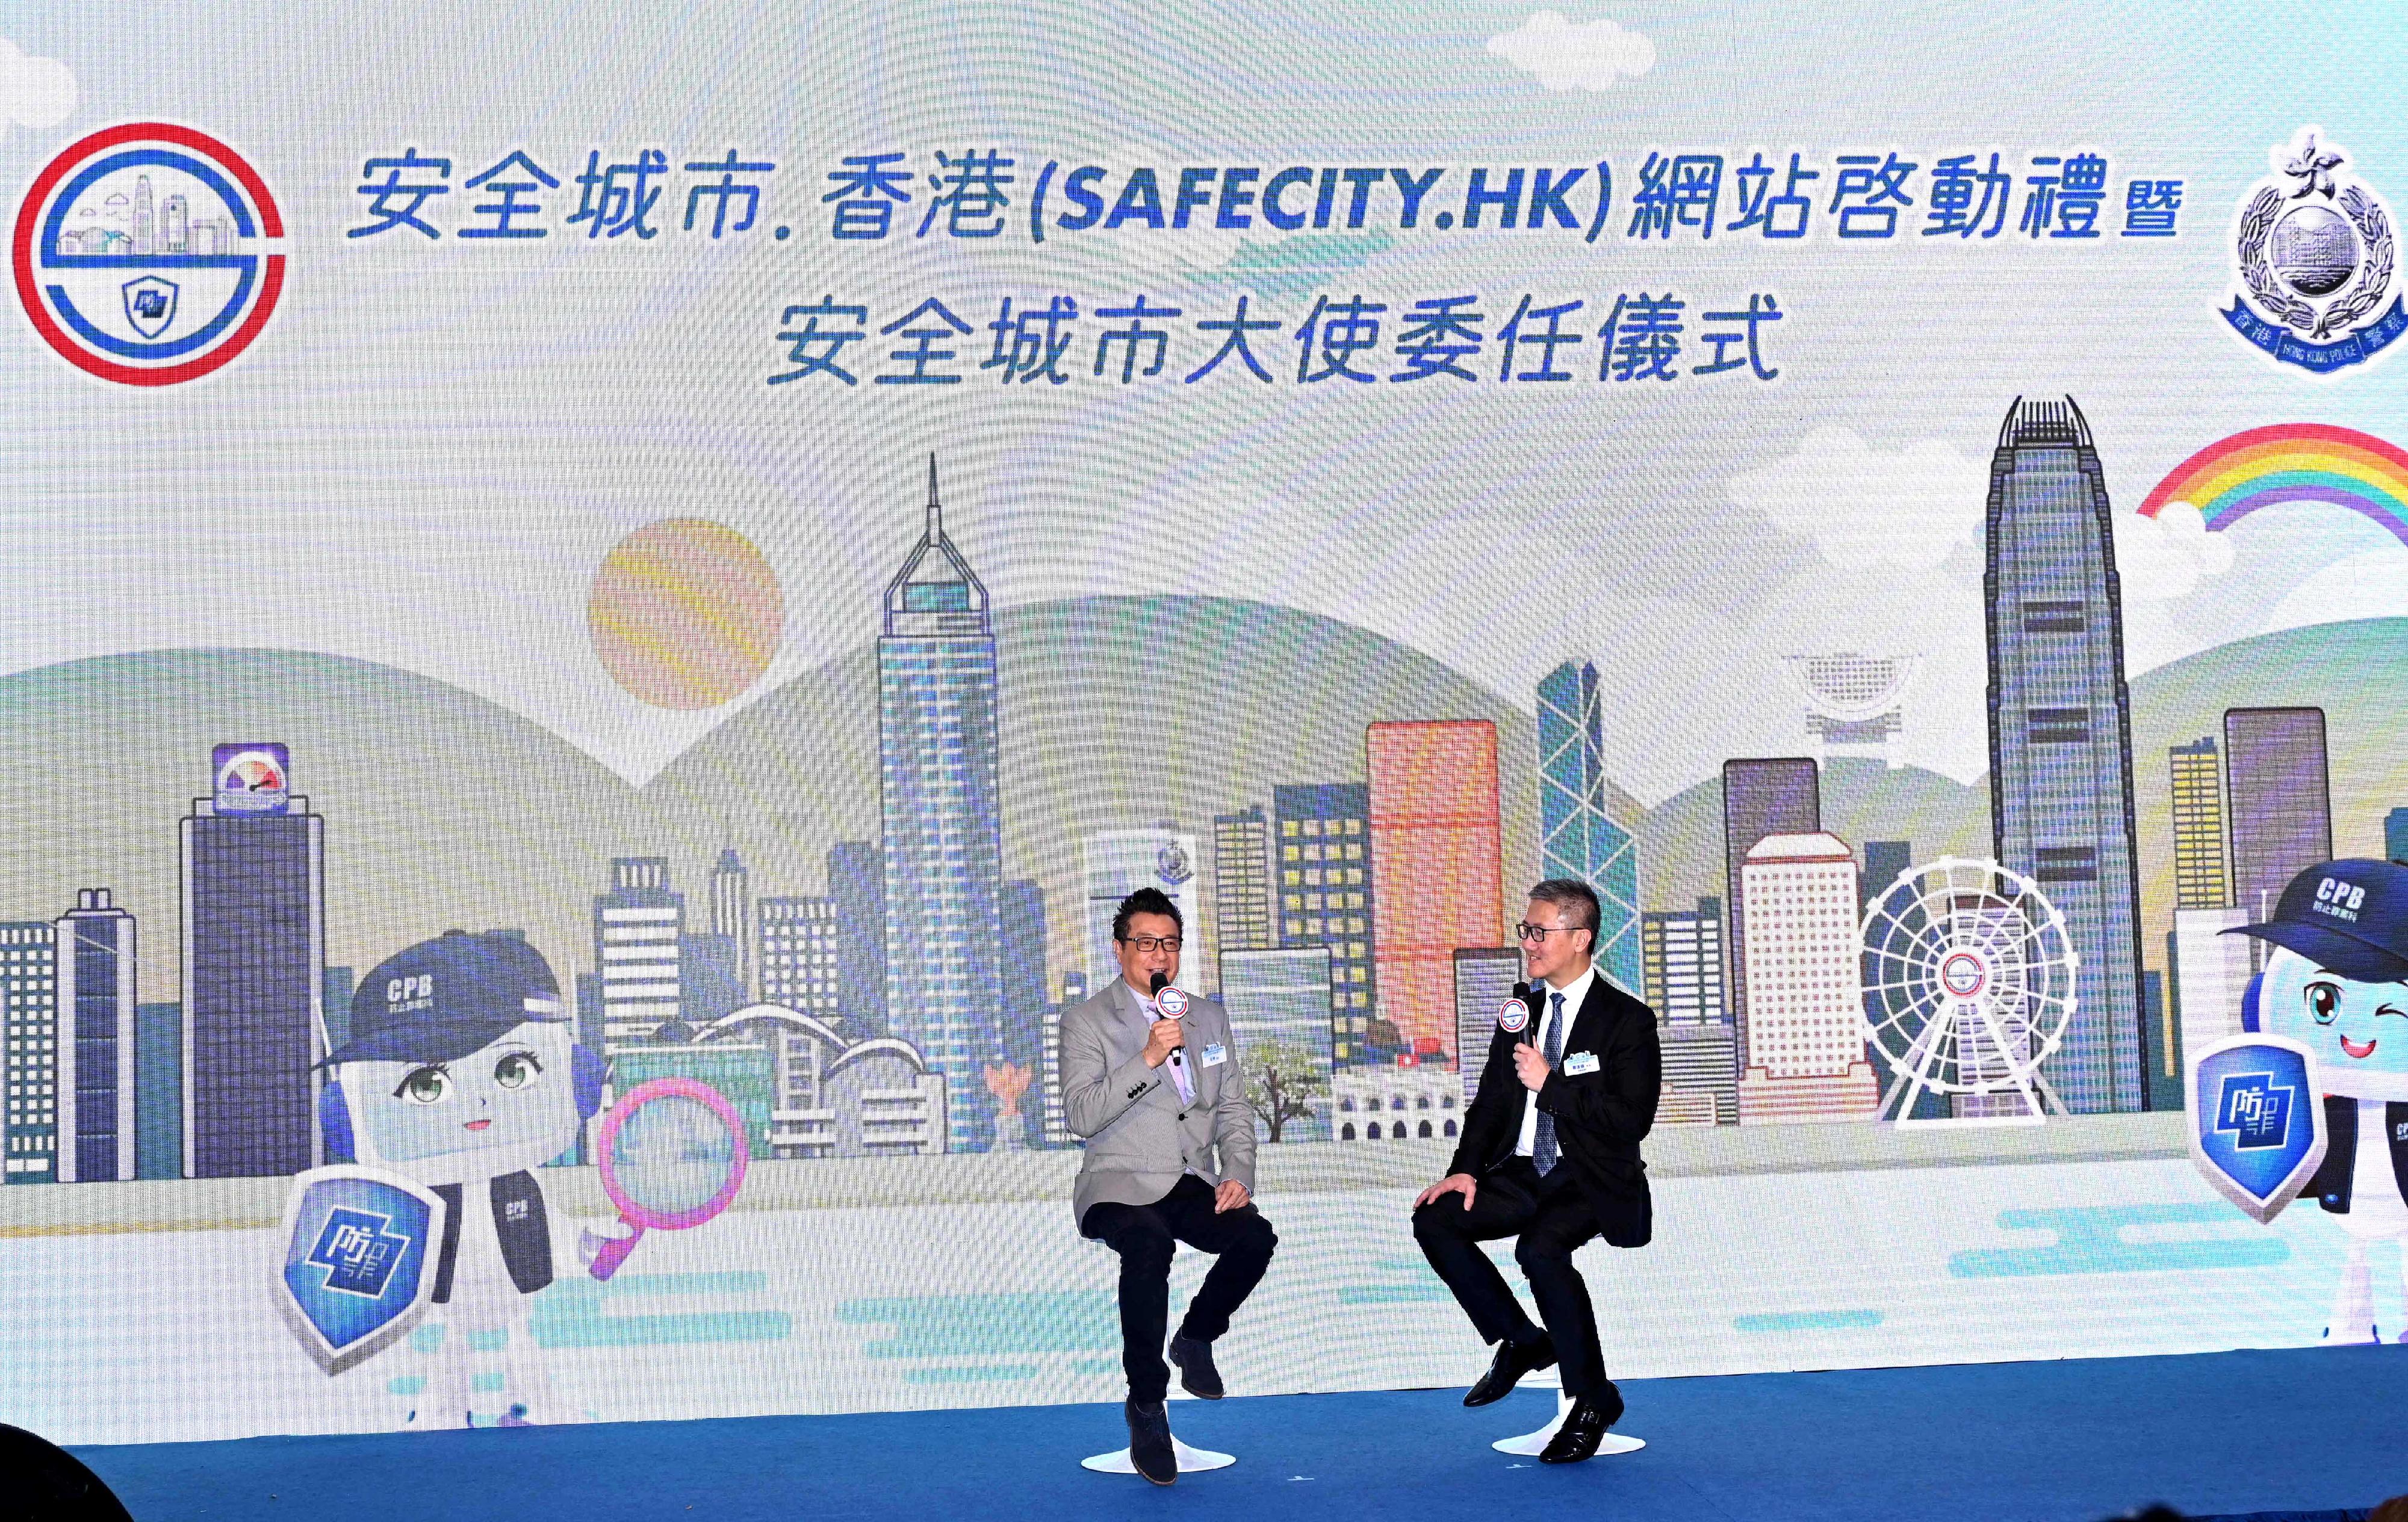 The Police Force today (May 16) launched a brand-new crime prevention website “SafeCity.HK” and appointed 47 “SafeCity Ambassadors”. Photo shows the Commissioner of Police, Mr Siu Chak-yee (right), having a chit-chat with artiste Mr Bill Chan, sharing crime prevention tips.